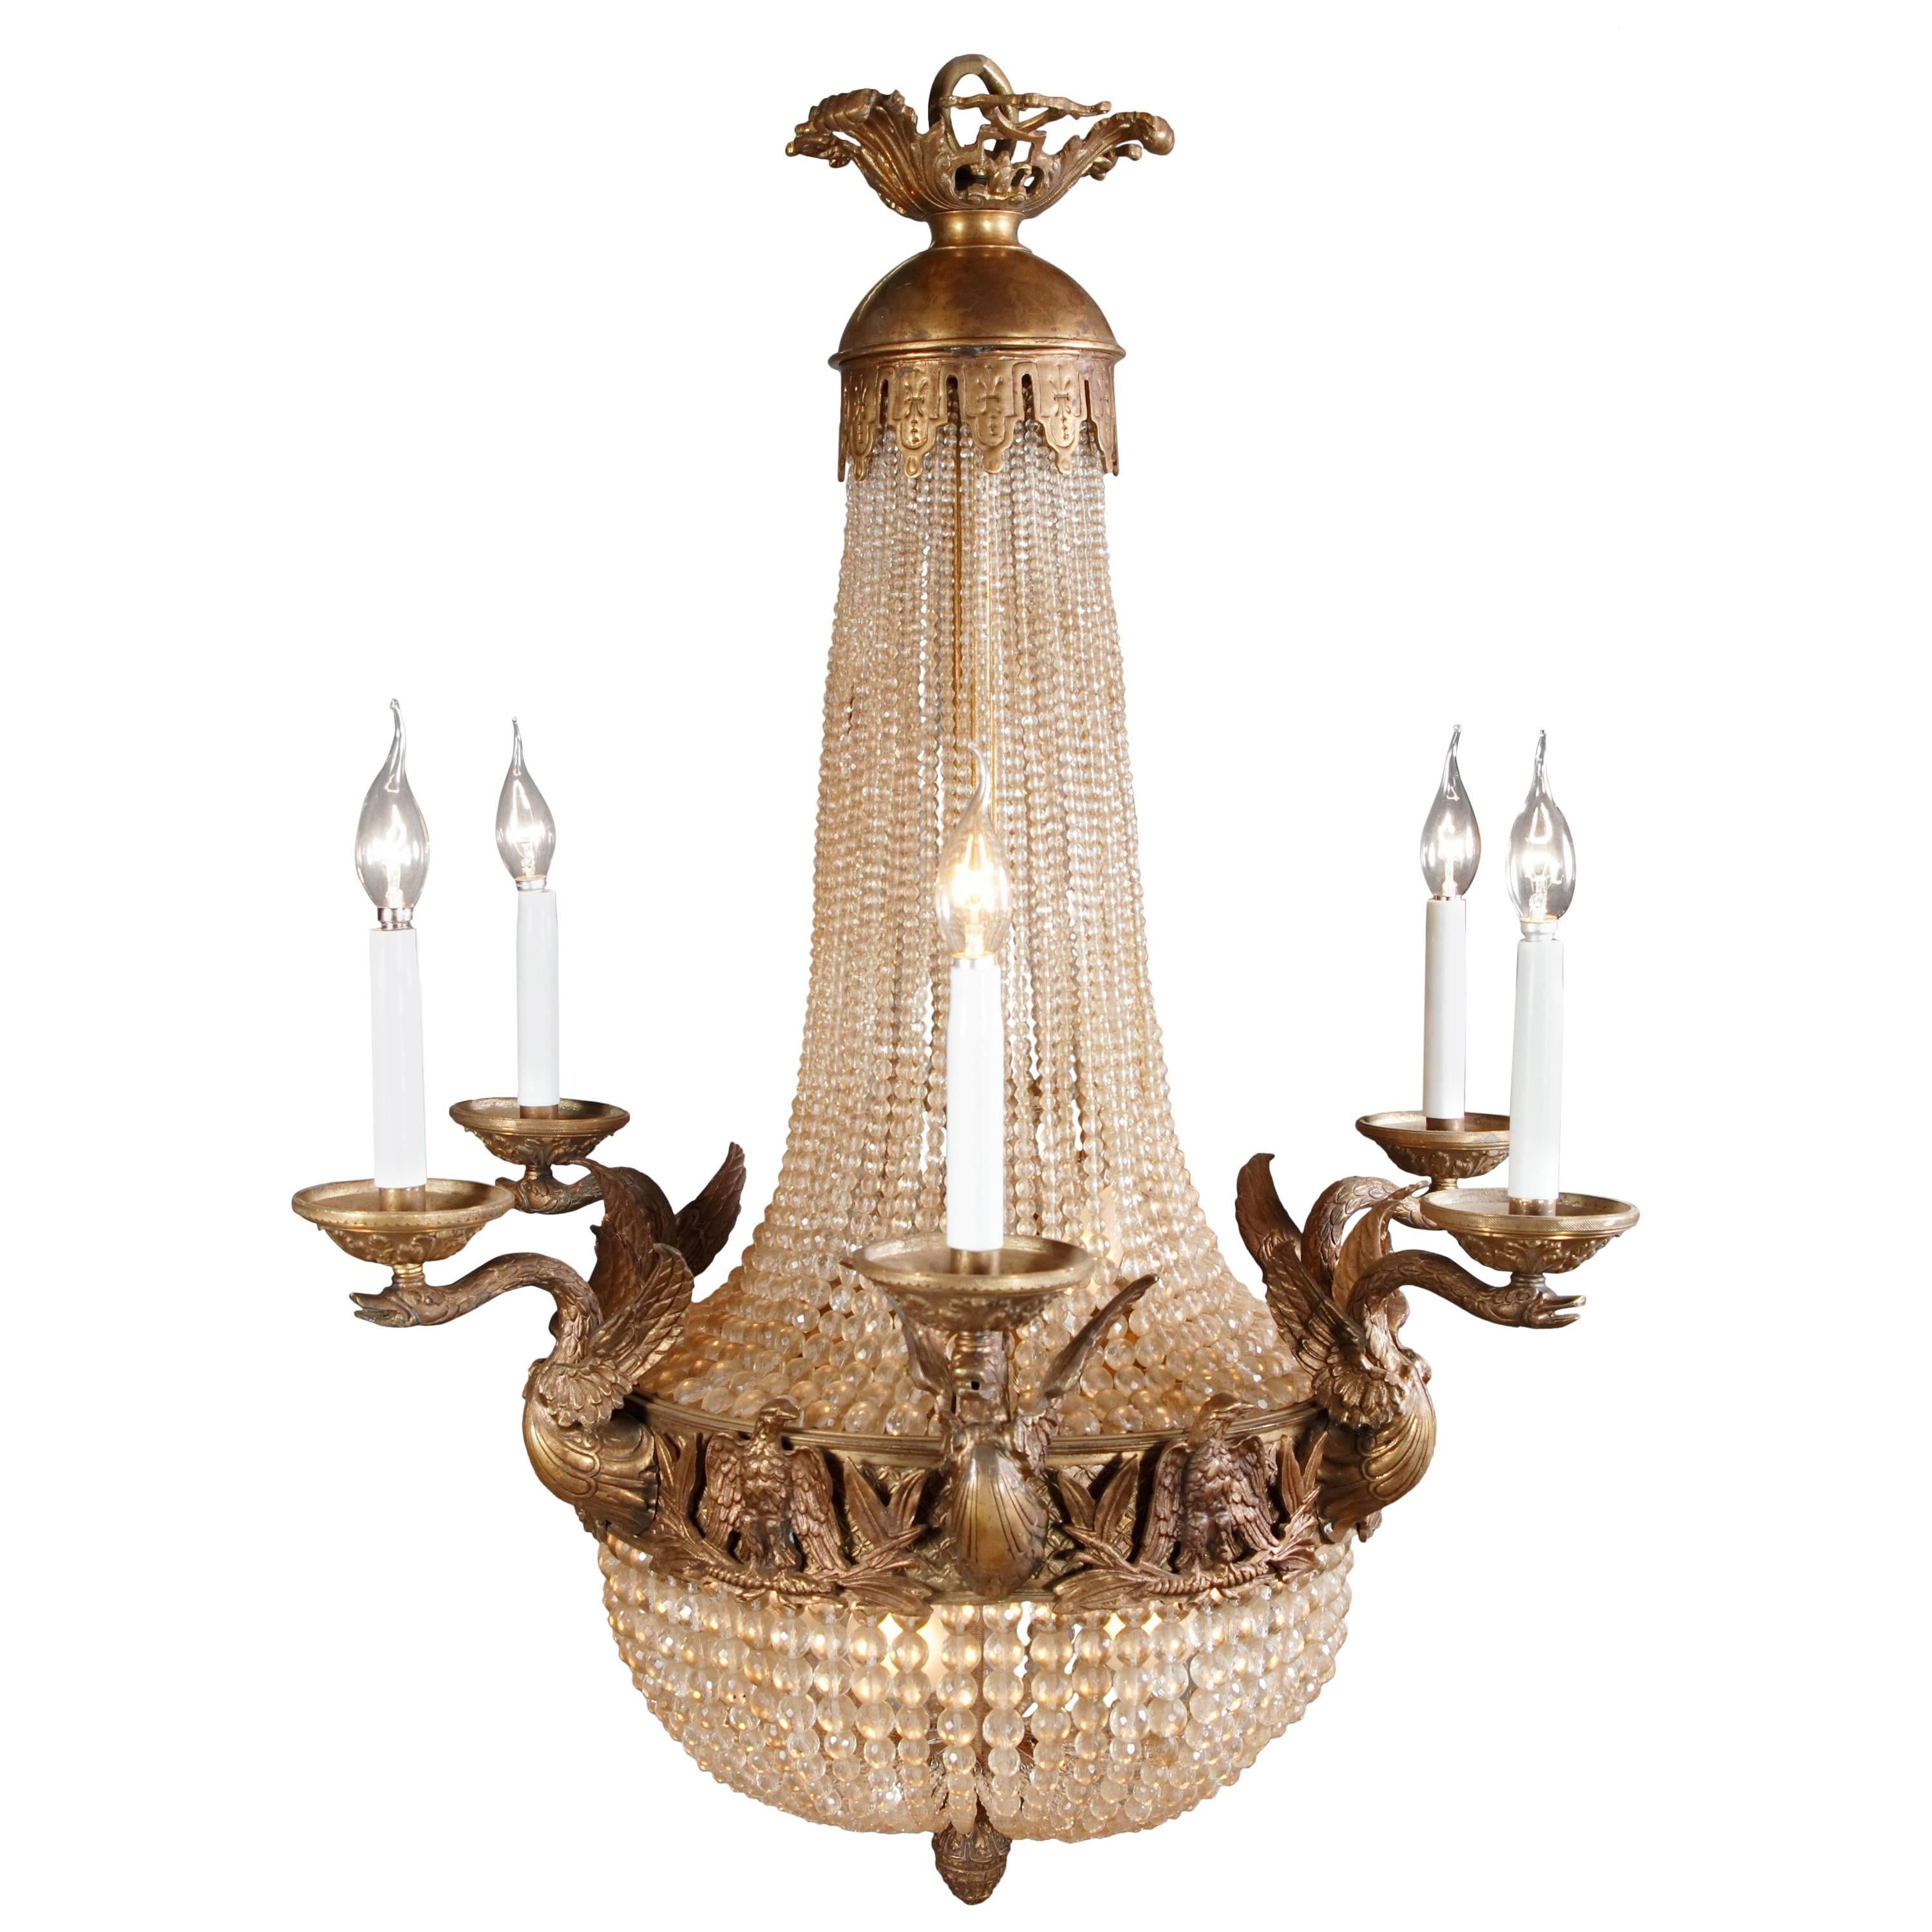 20th Century Empire Style Chandelier Referred to Empress Joséphine